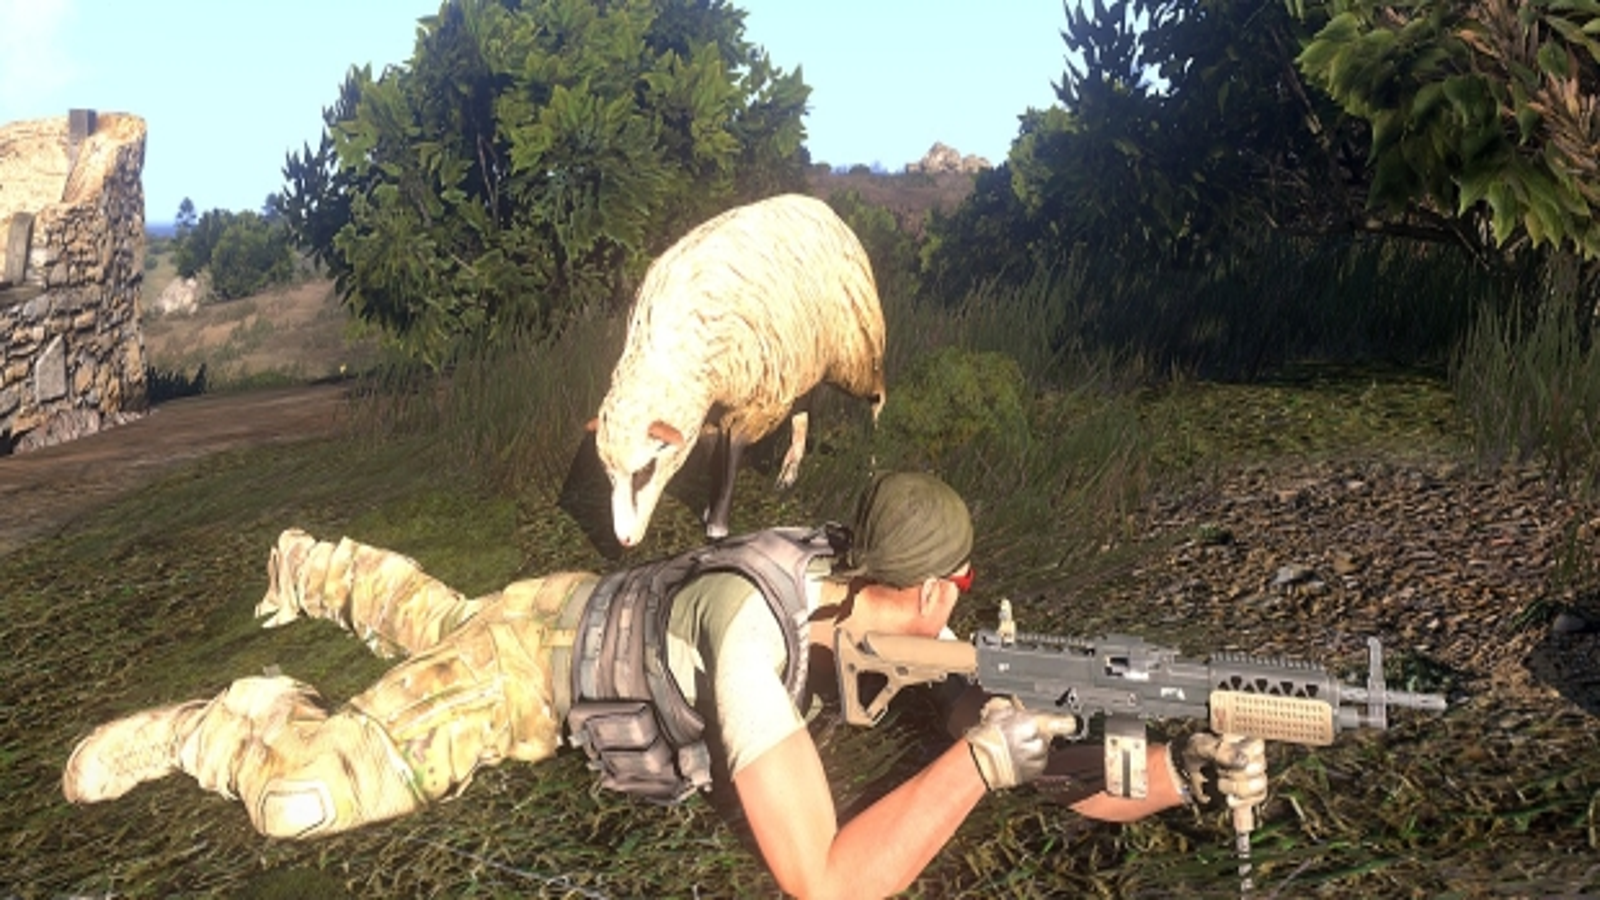 WHY ARMA 3 IS GREAT 